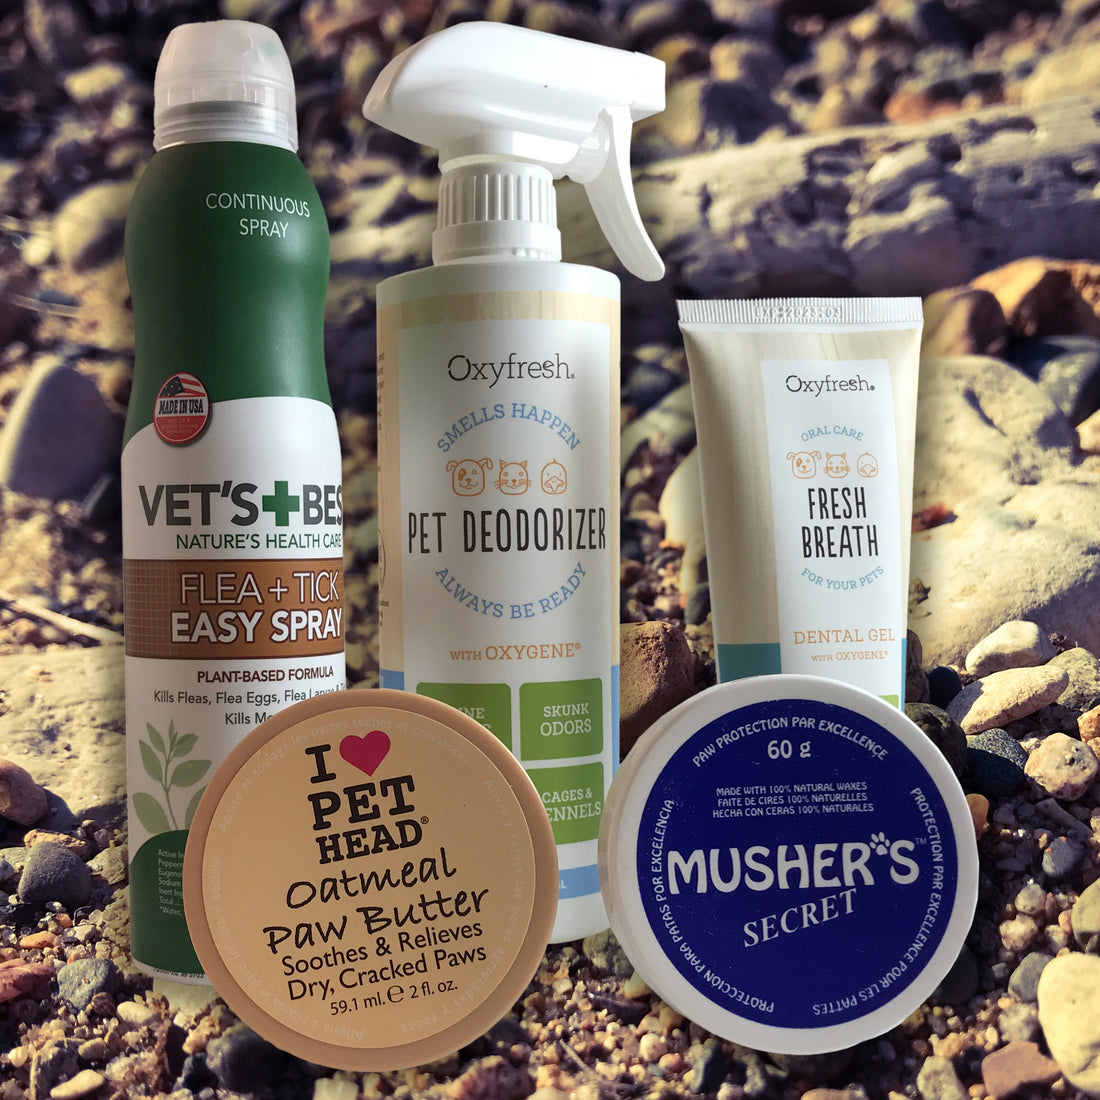 Subscribe and Save now available for select grooming items!